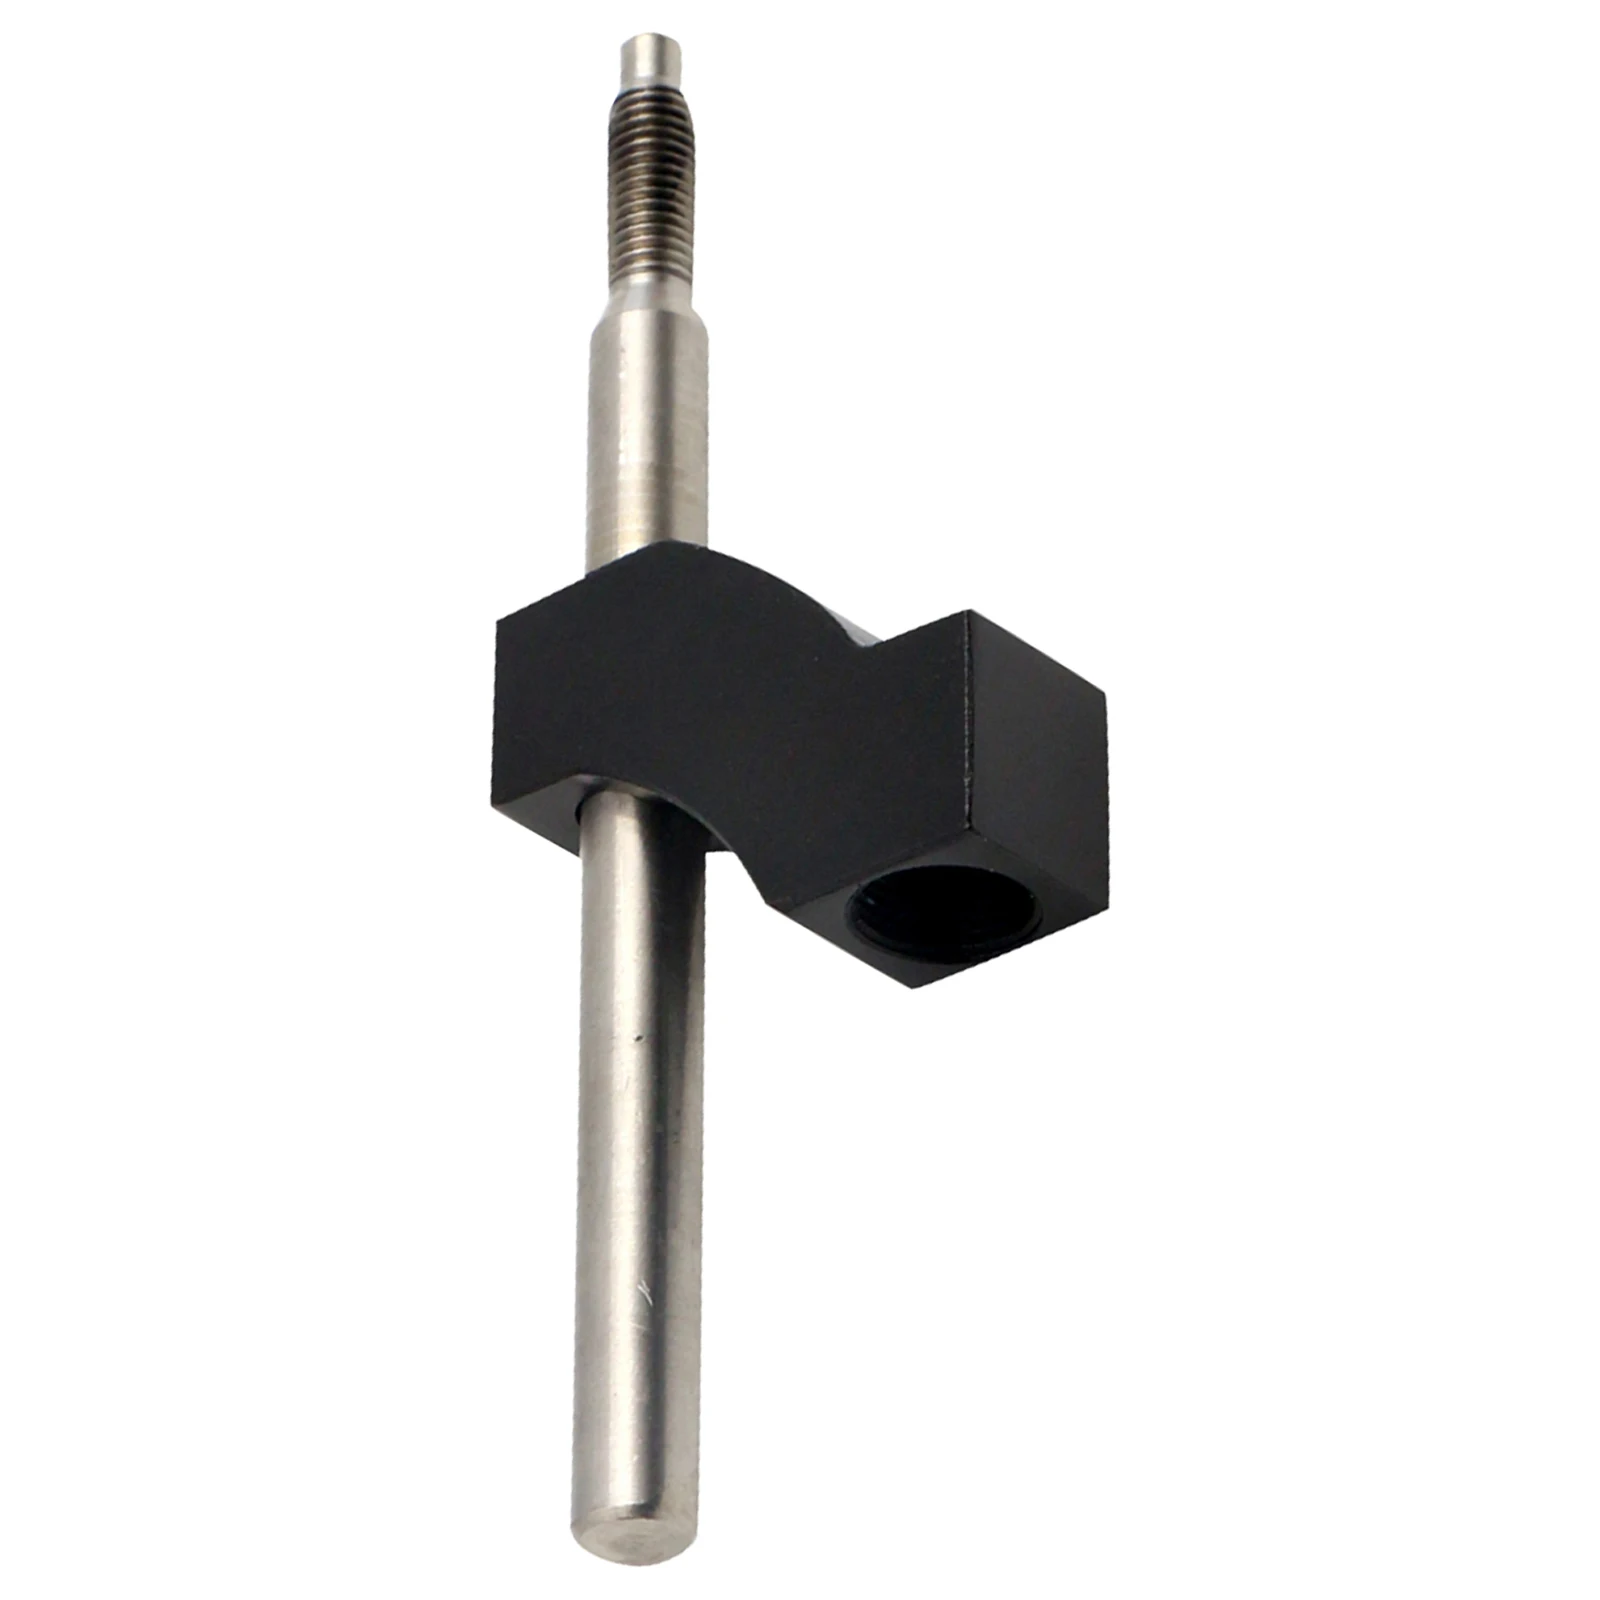 Knob Extension , Adjustable Replacements   Extension Fit for 